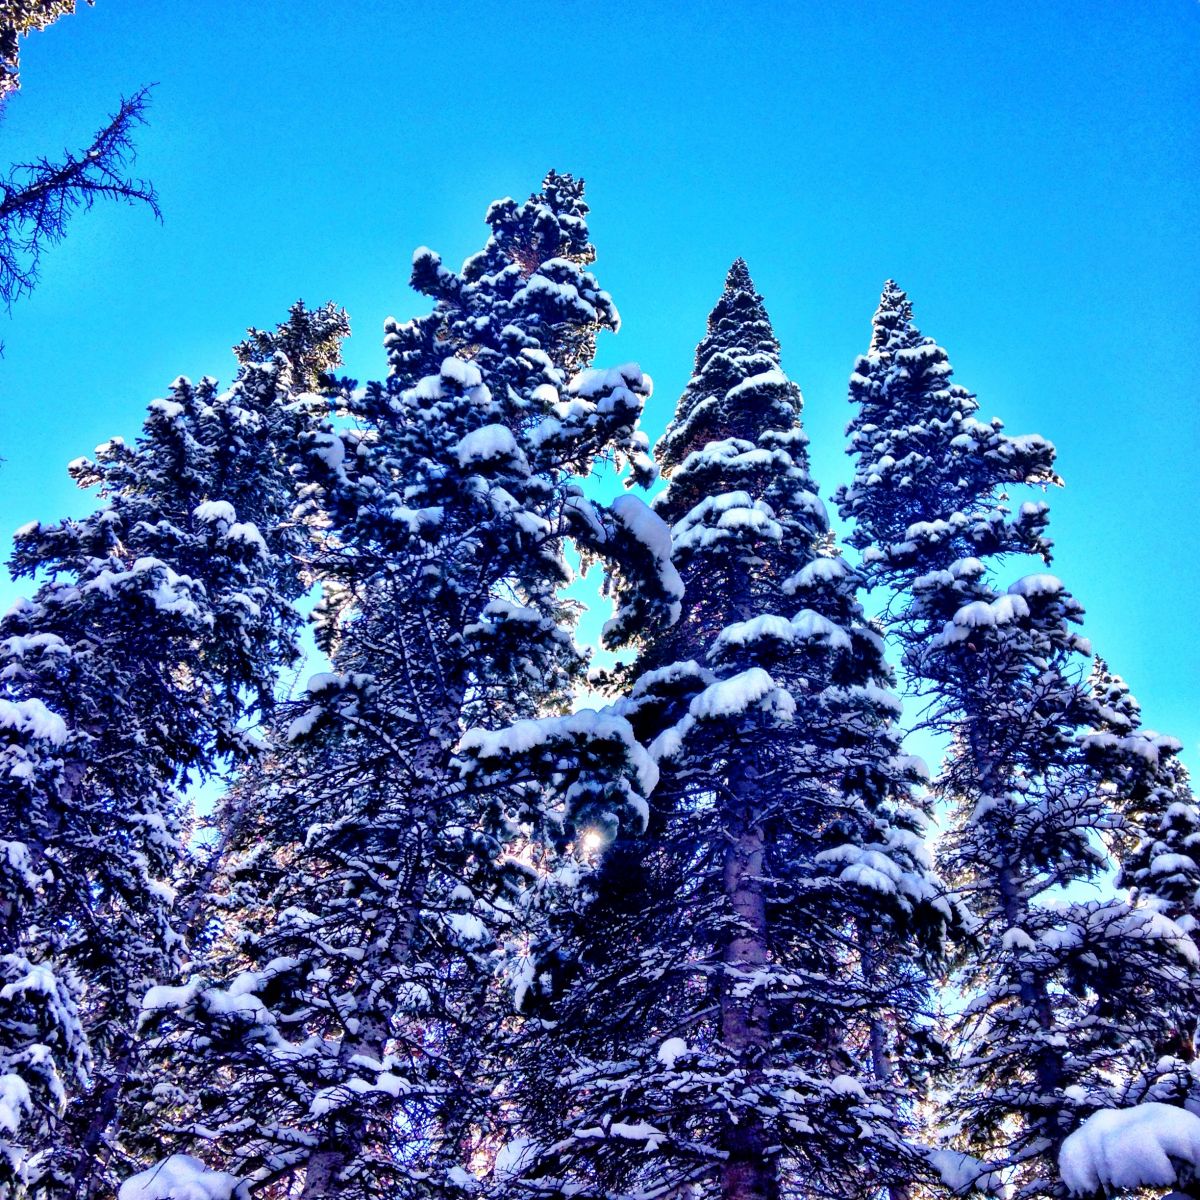 Snow Covered Pine Trees, Snowmass Colorado, Epic